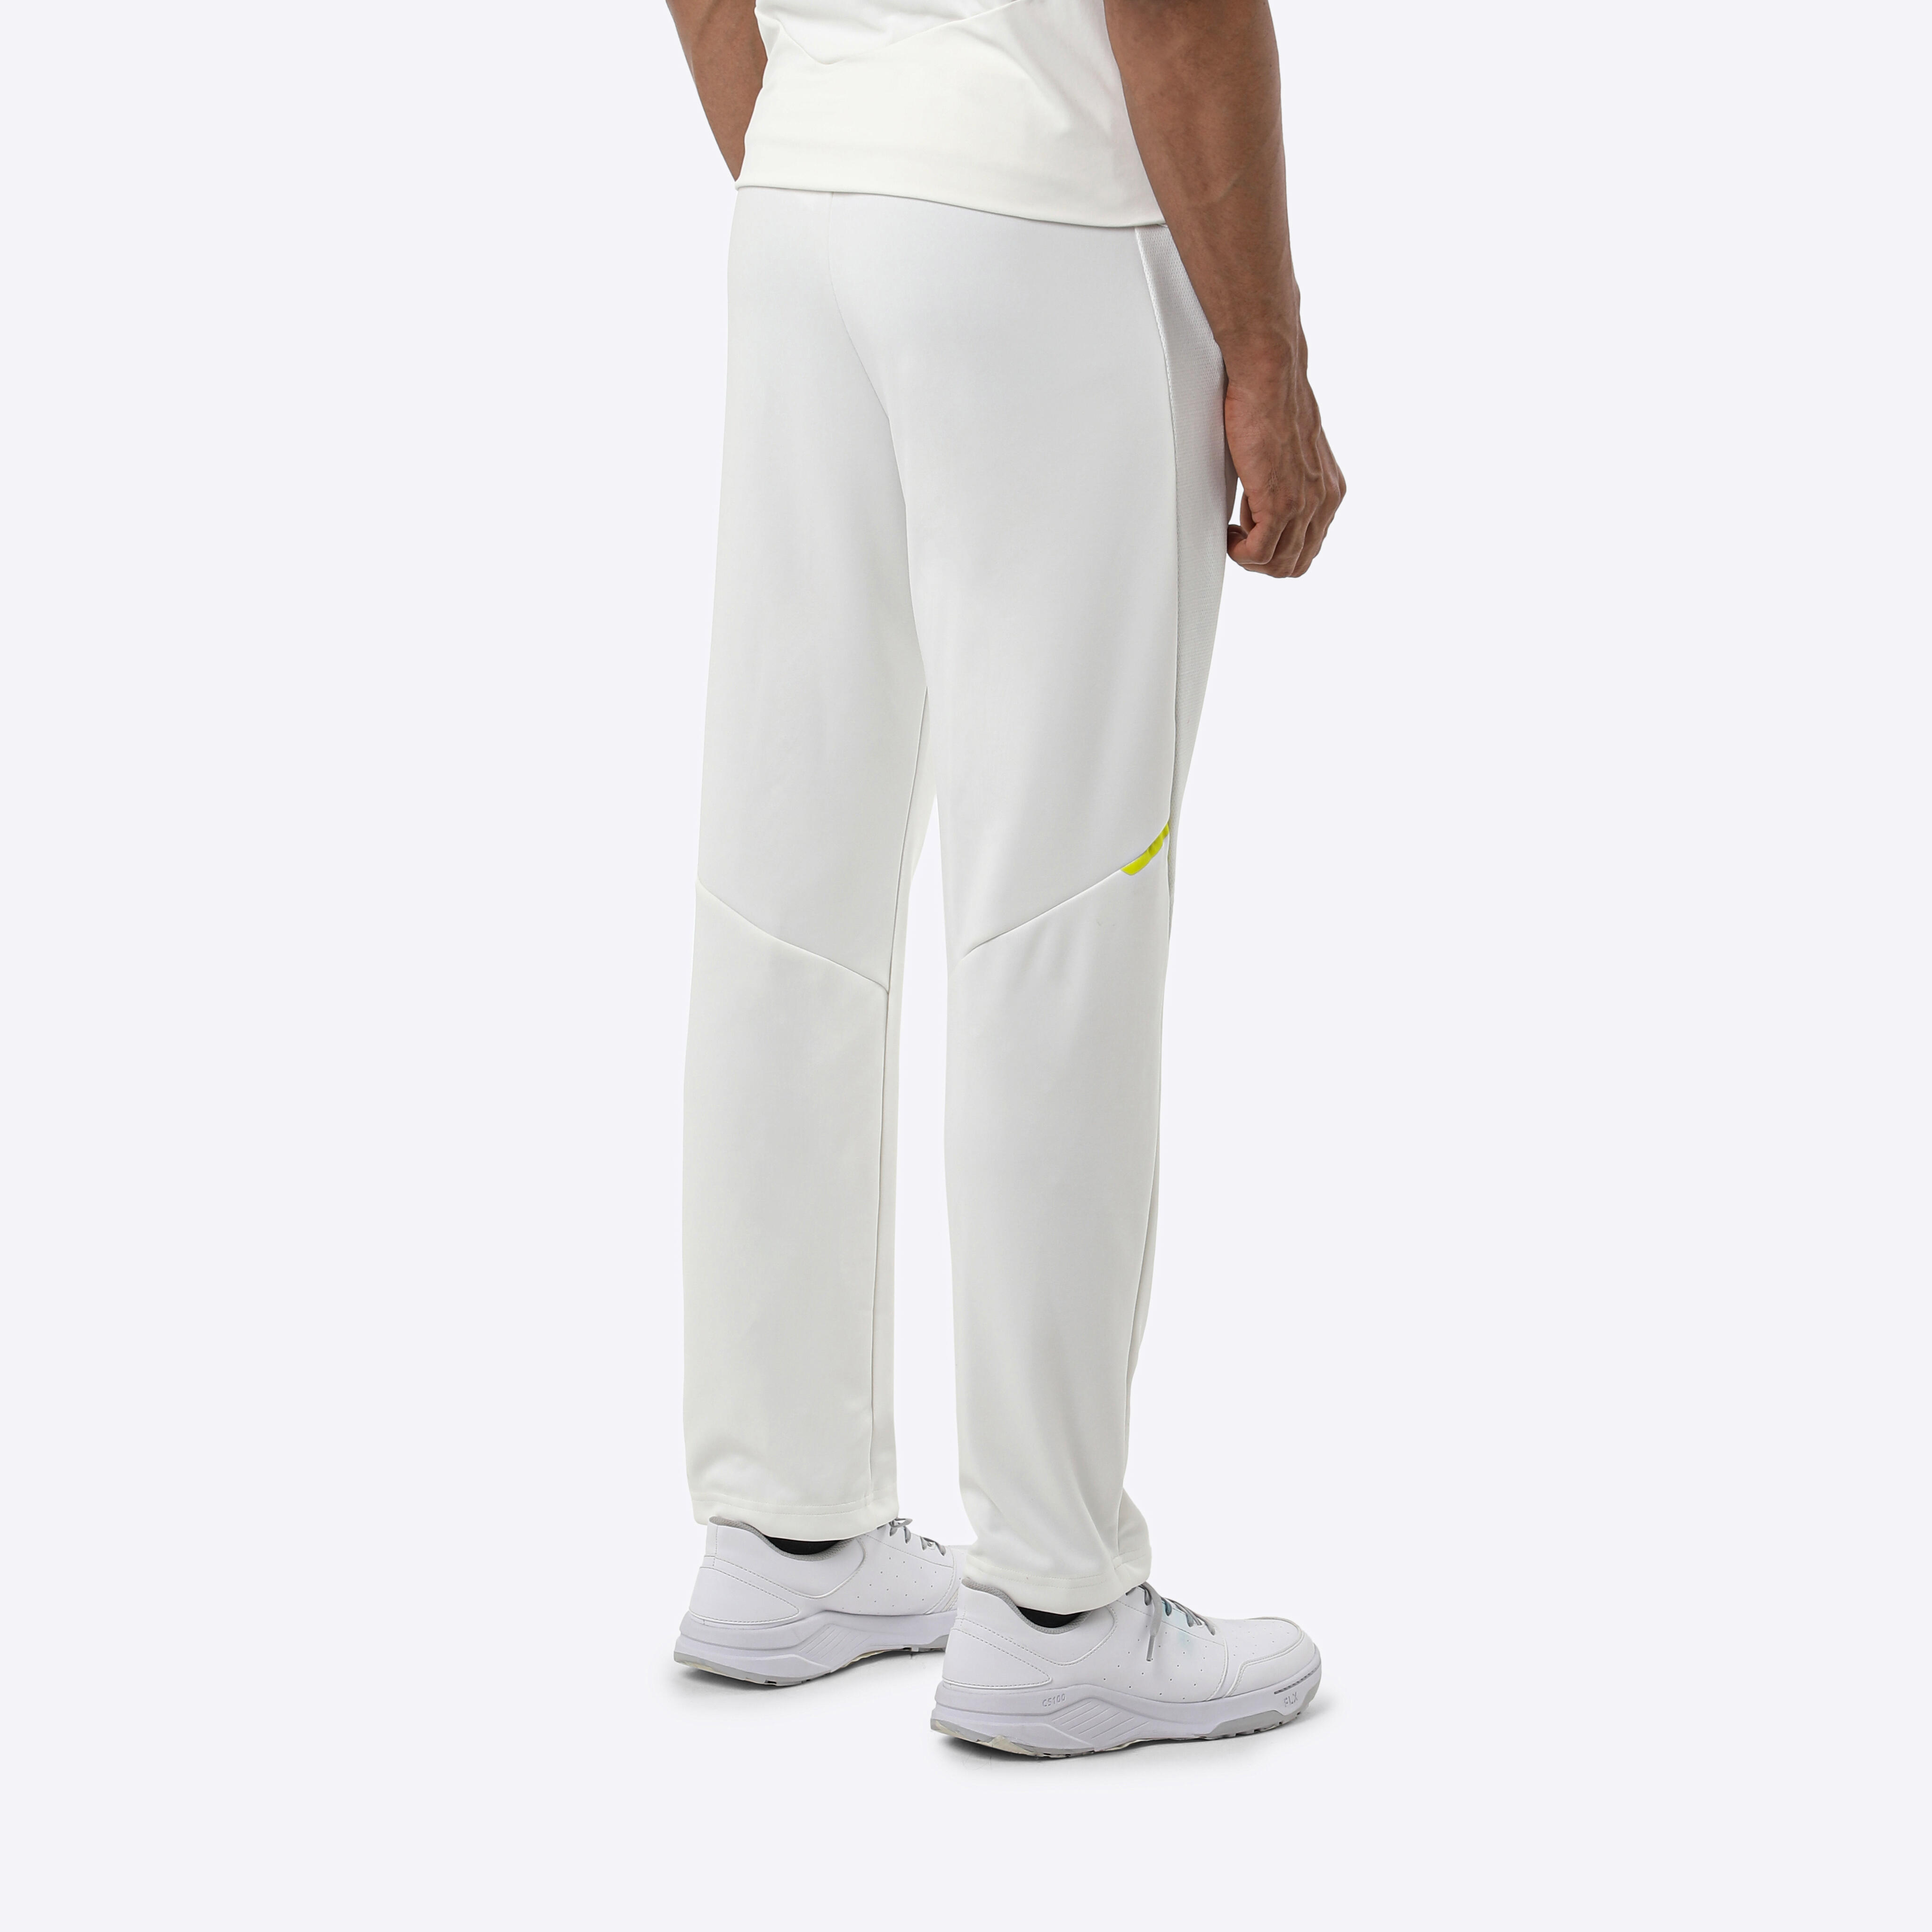 CW White Cricket Dress Uniform Dryfit Half Sleeve T-Shirt Full Length  Trouser (Pant) for Men (28) : Amazon.in: Clothing & Accessories